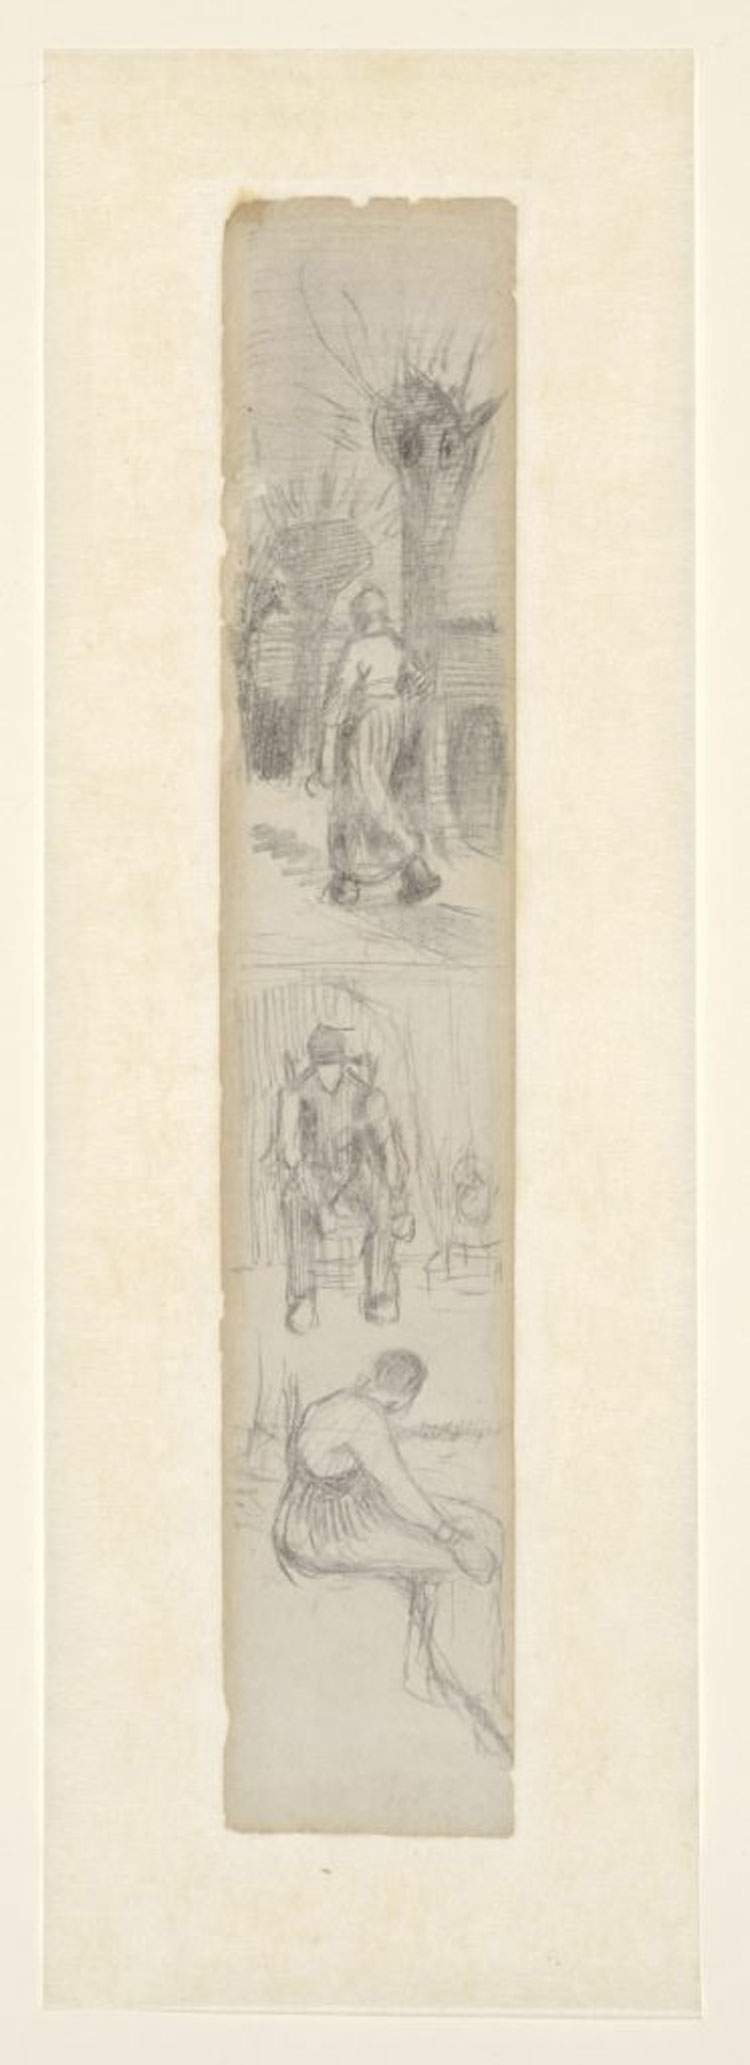 Discovered in a novel rare bookmark drawn by Van Gogh. Now it's on display